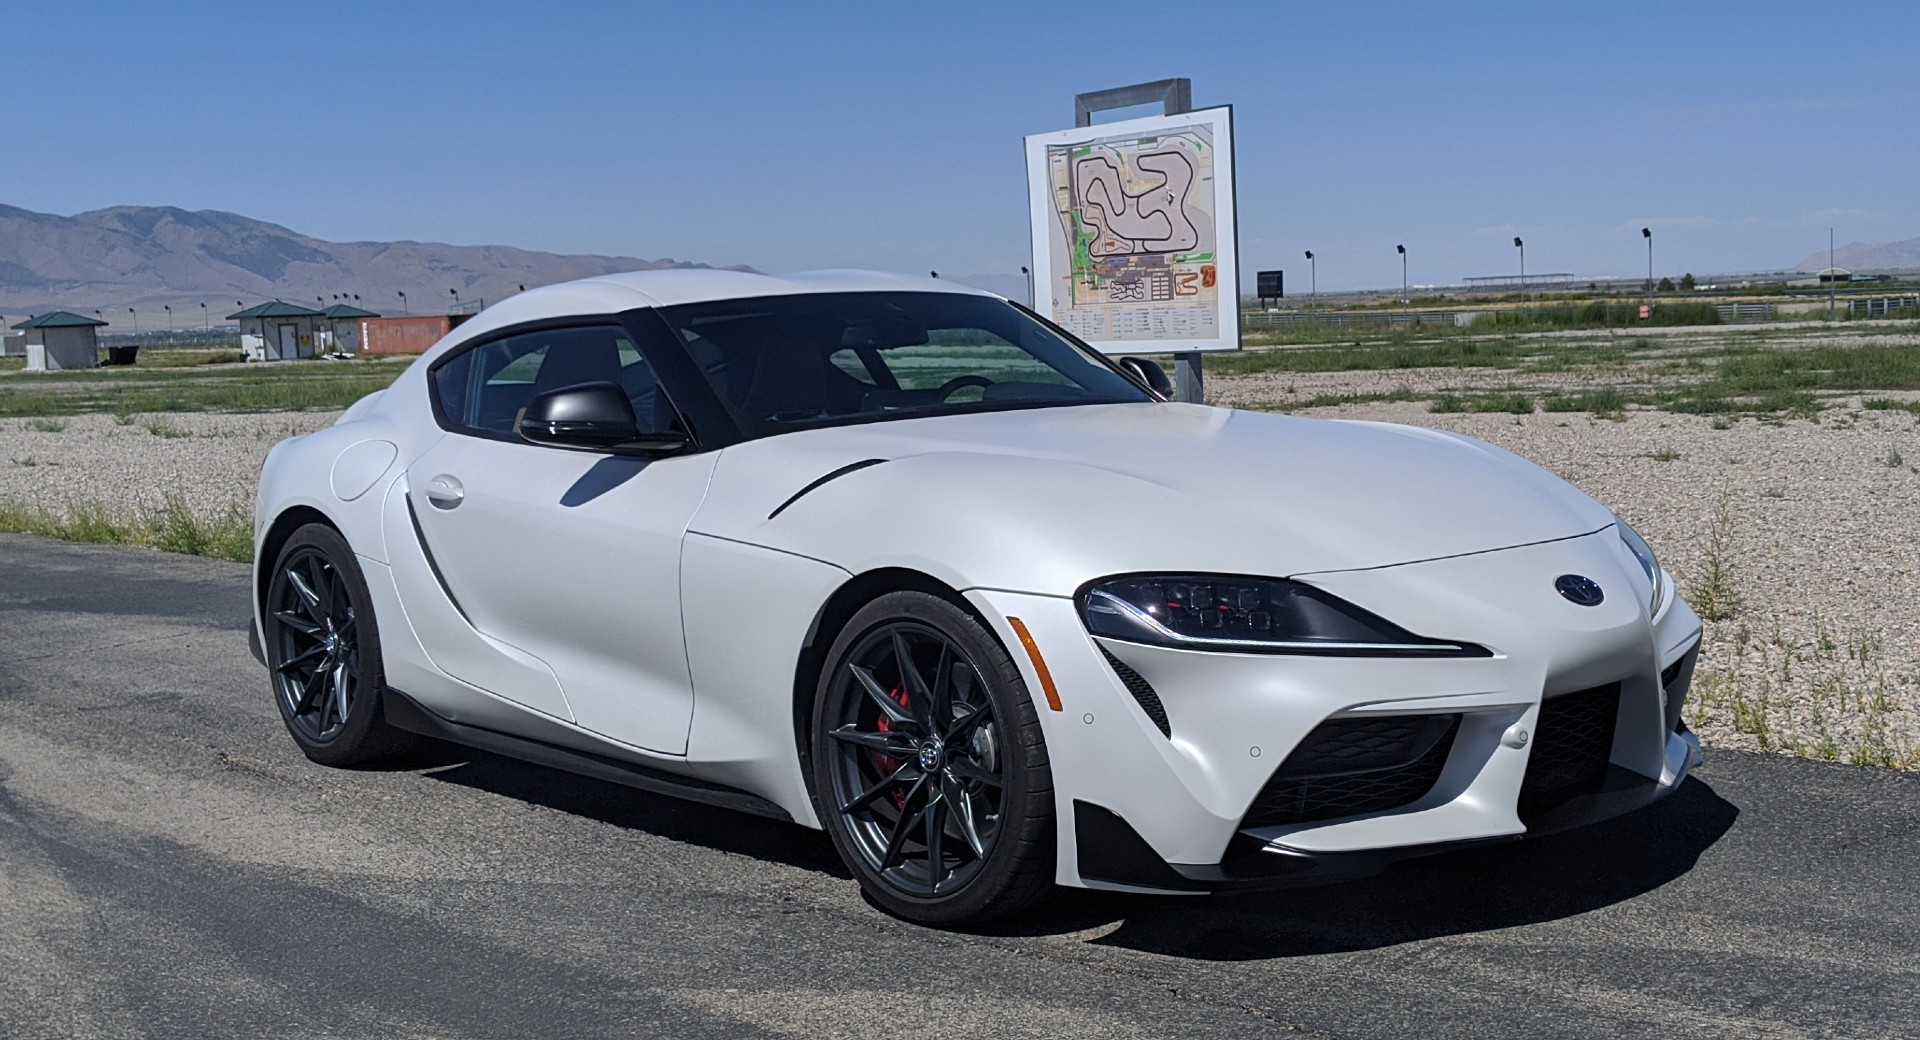 We’re Driving The Manual 2023 Toyota Supra, What Do You Want To Know? Auto Recent